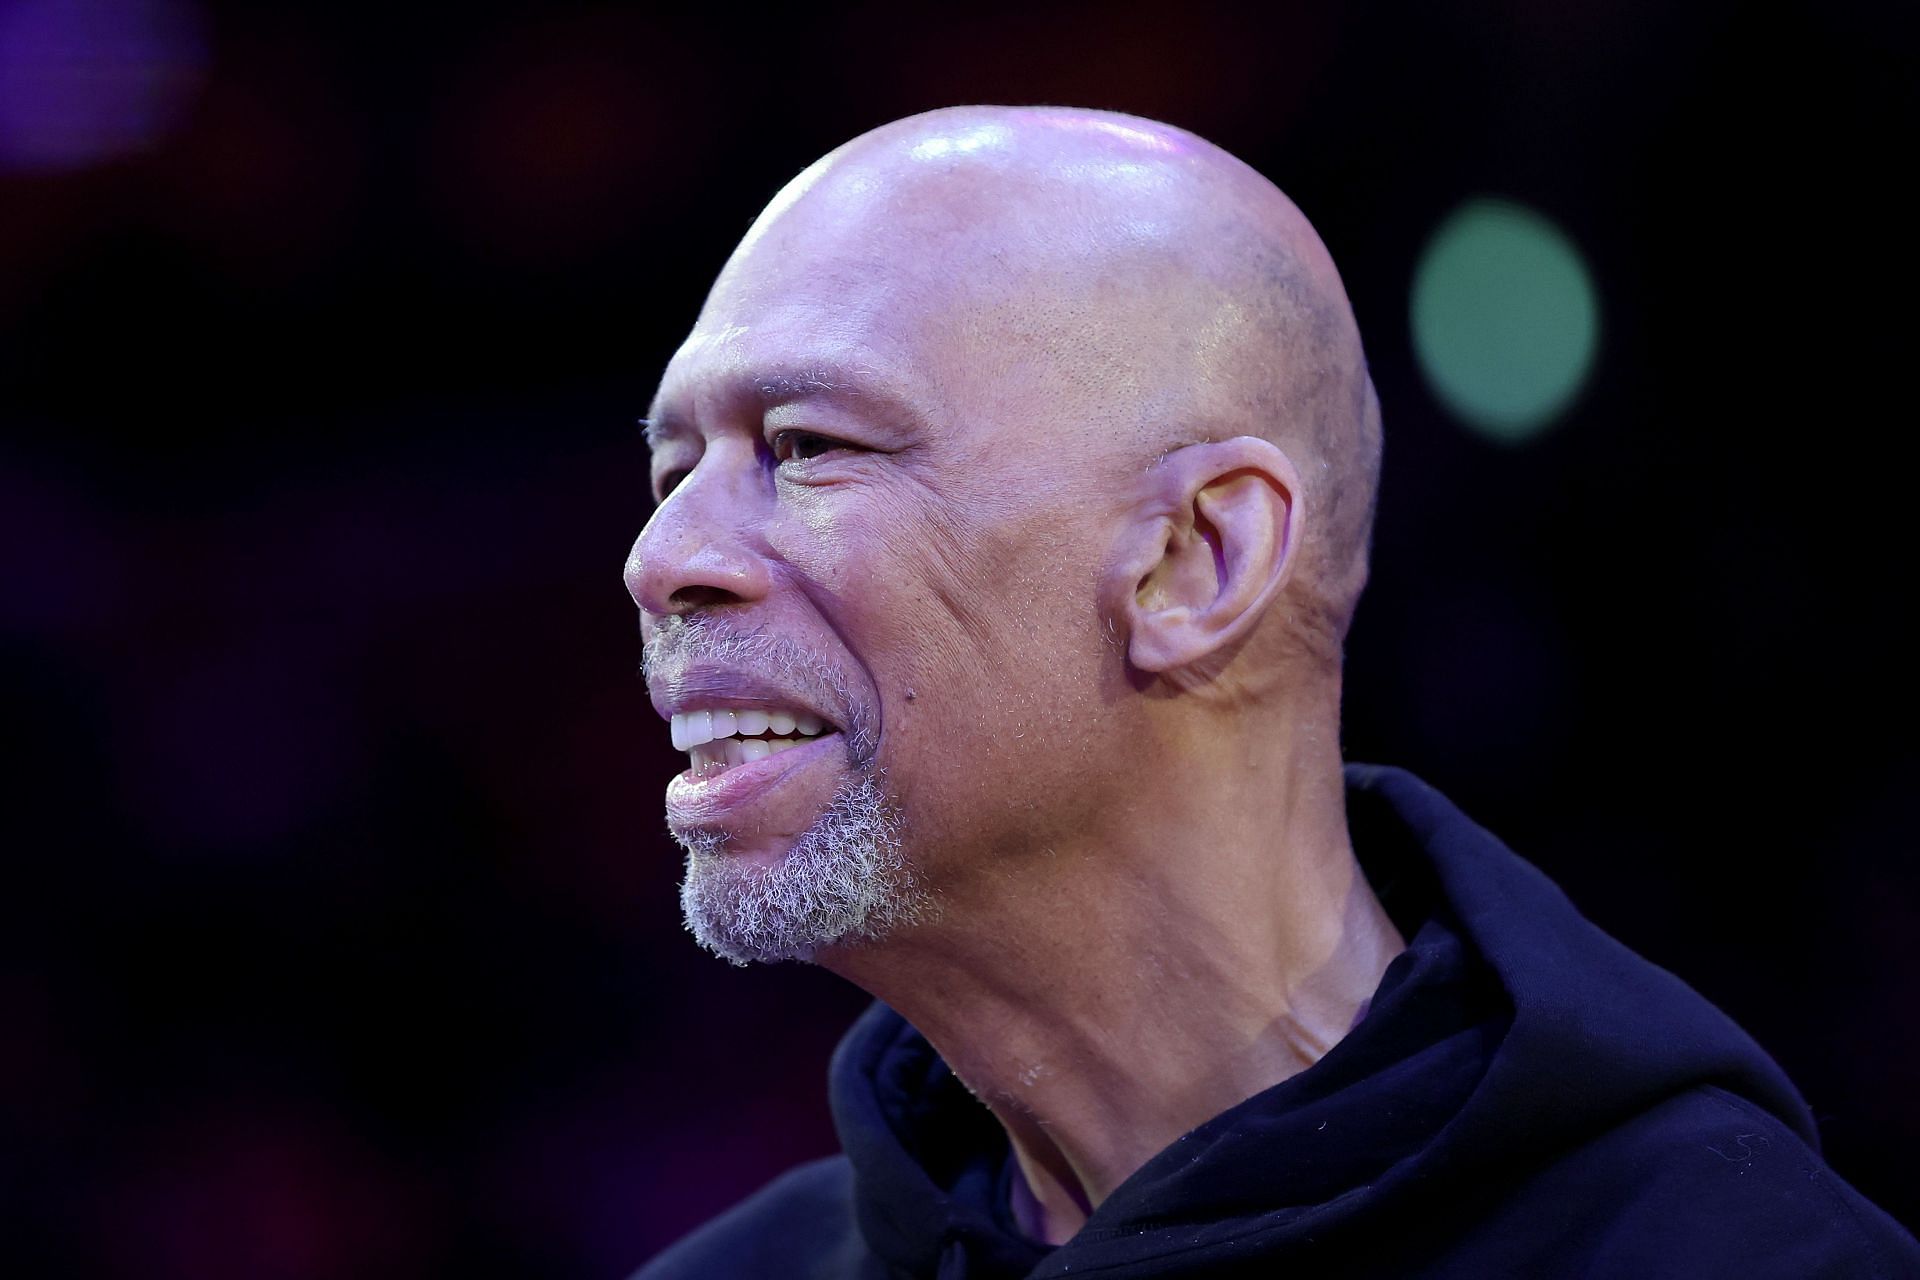 Kareem Abdul-Jabbar&#039;s first marriage took place in 1971.